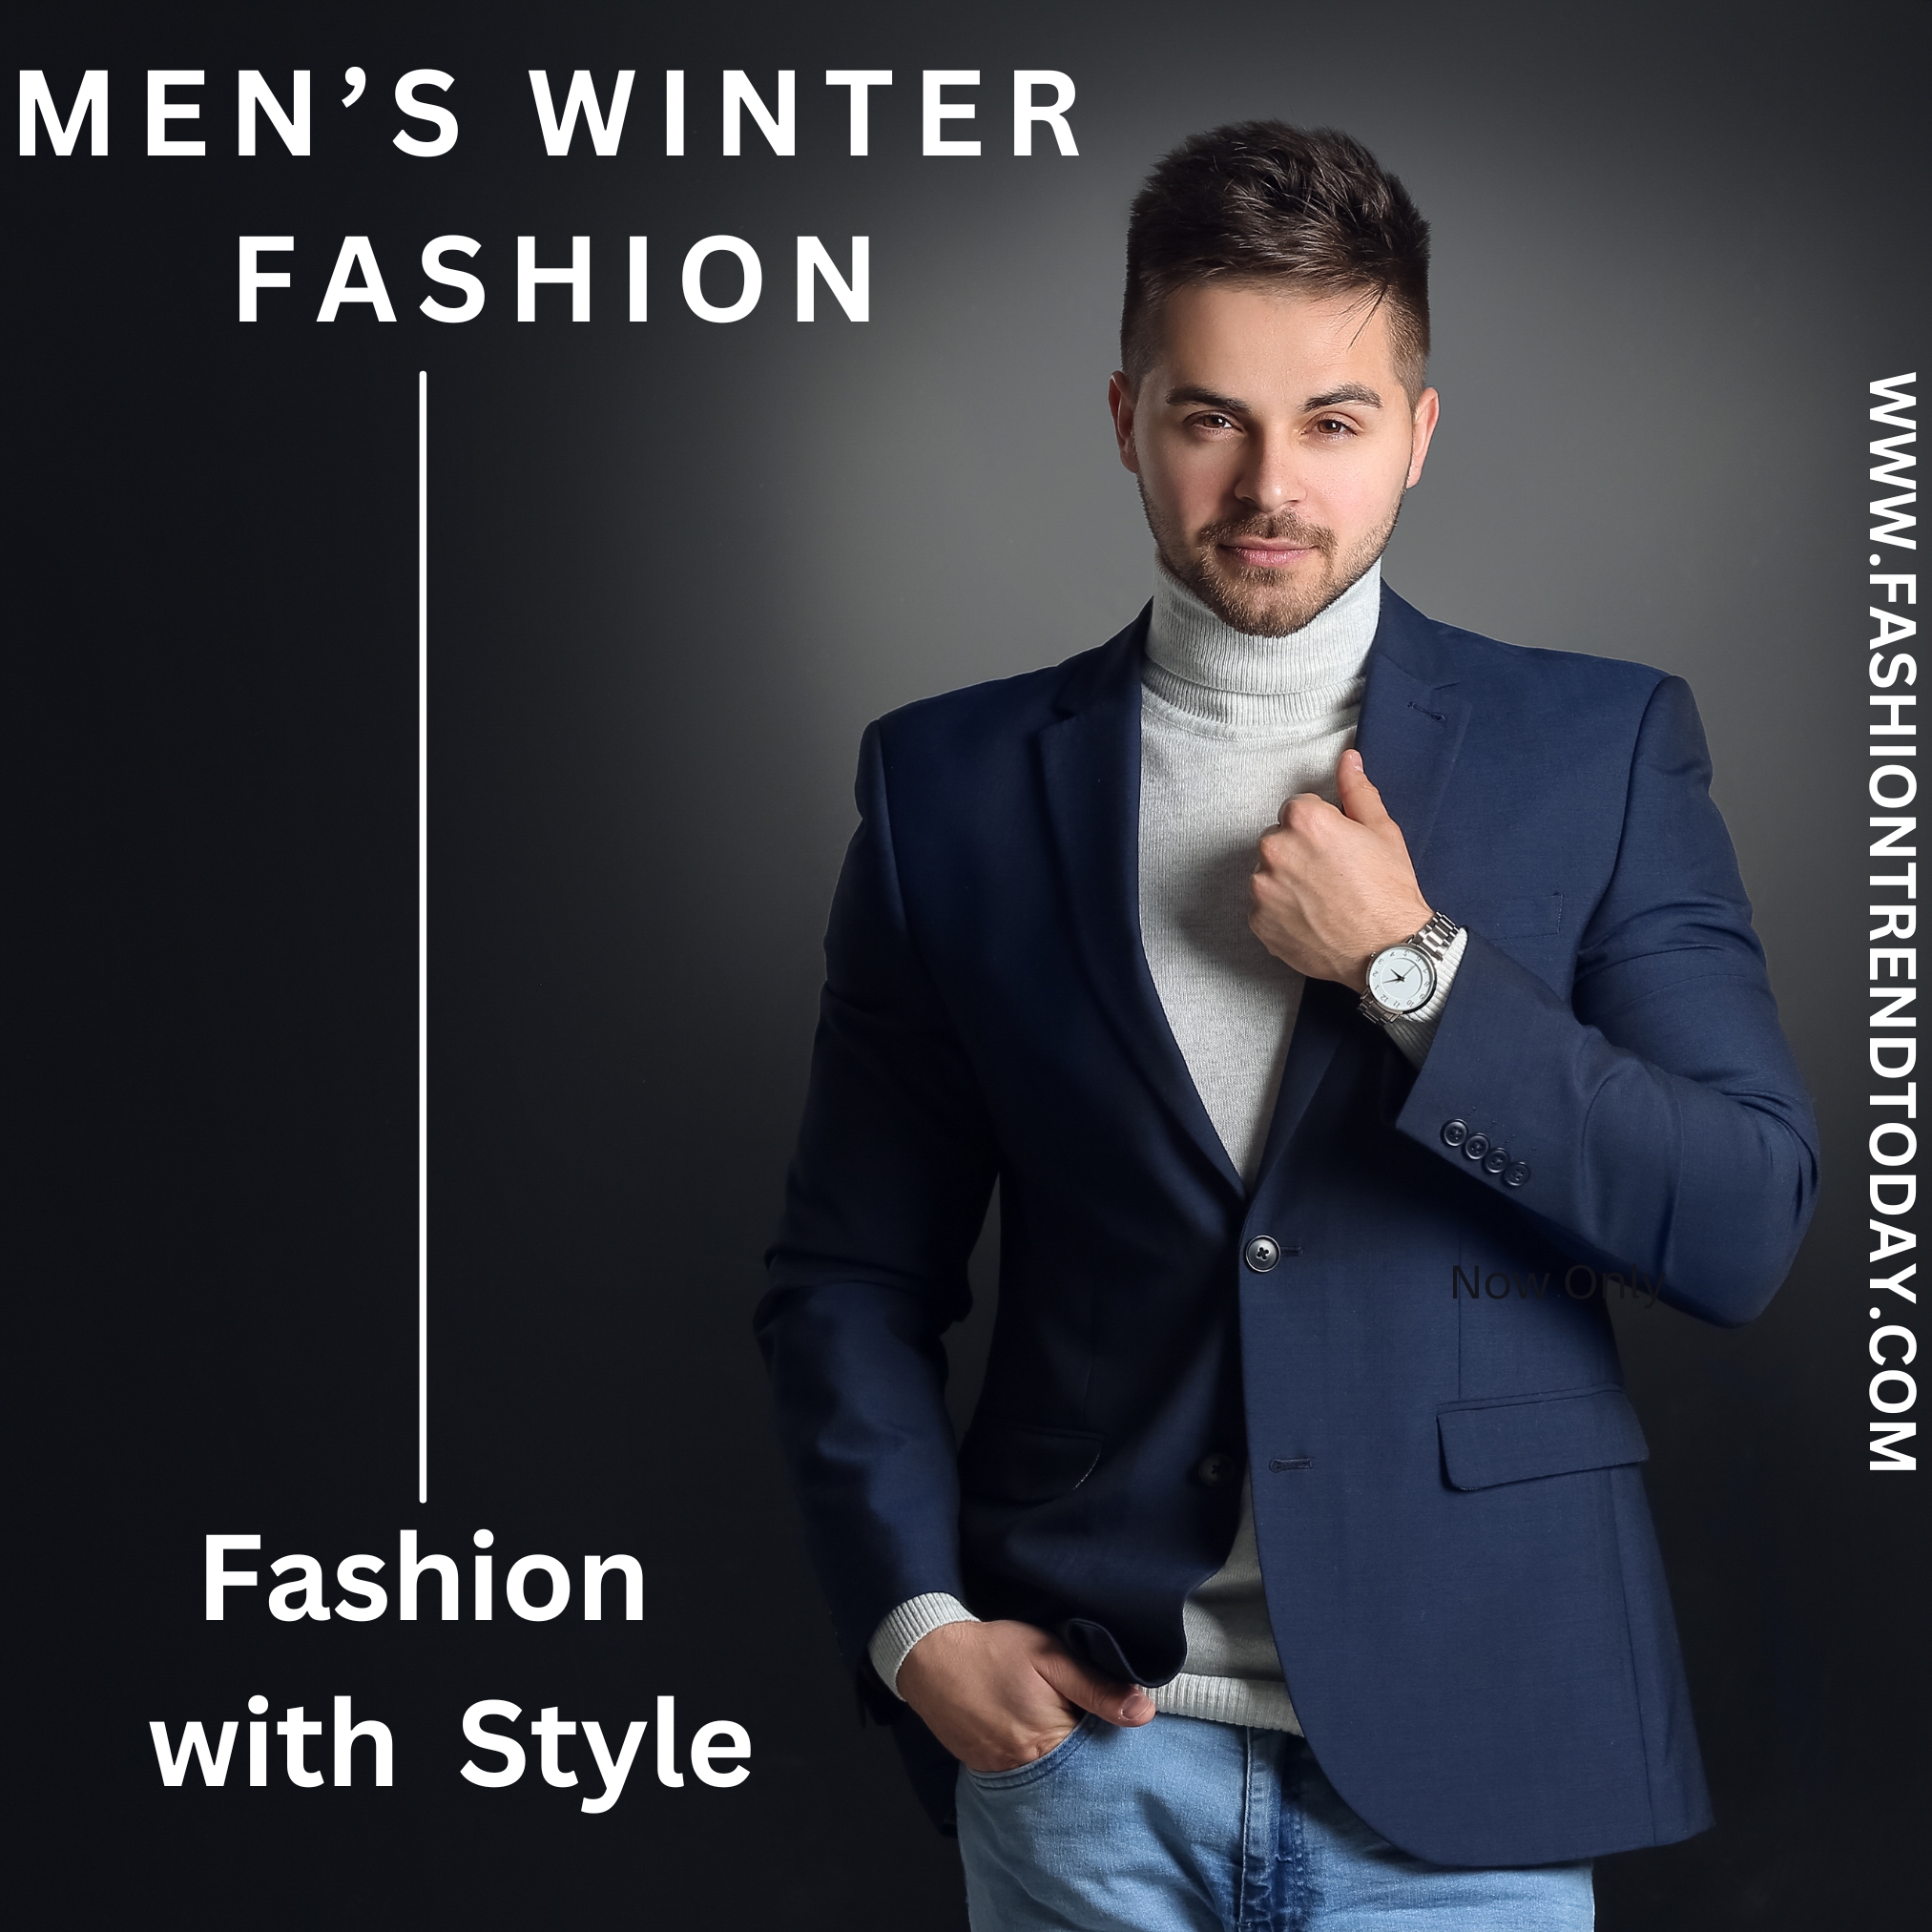 Cold Days, Hot Trends: Ignite Your Winter Look